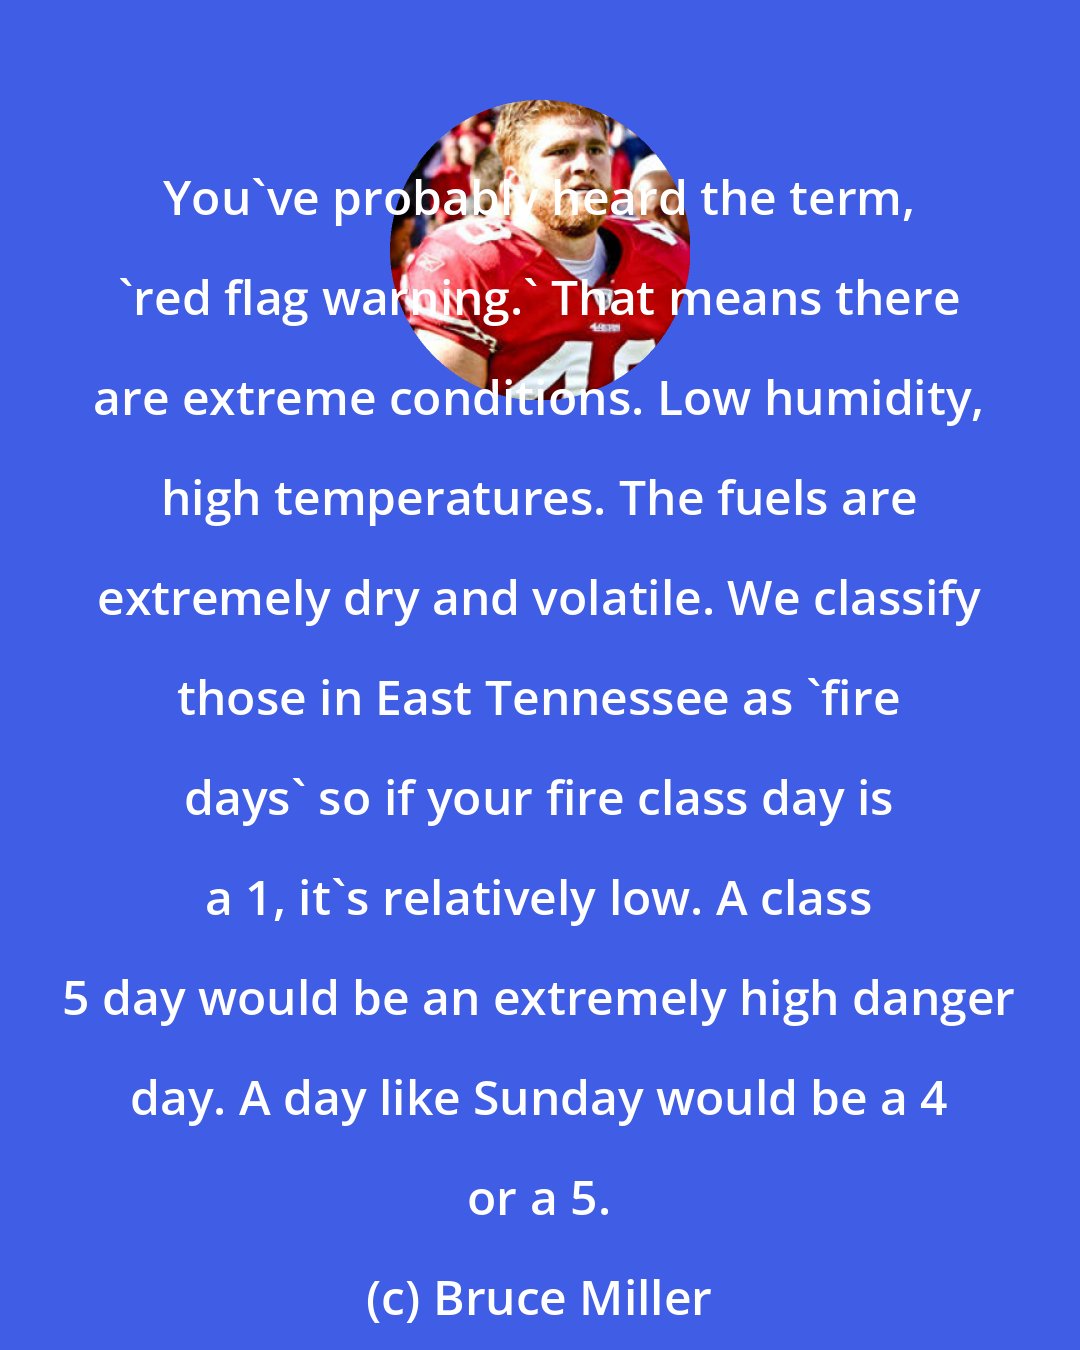 Bruce Miller: You've probably heard the term, 'red flag warning.' That means there are extreme conditions. Low humidity, high temperatures. The fuels are extremely dry and volatile. We classify those in East Tennessee as 'fire days' so if your fire class day is a 1, it's relatively low. A class 5 day would be an extremely high danger day. A day like Sunday would be a 4 or a 5.